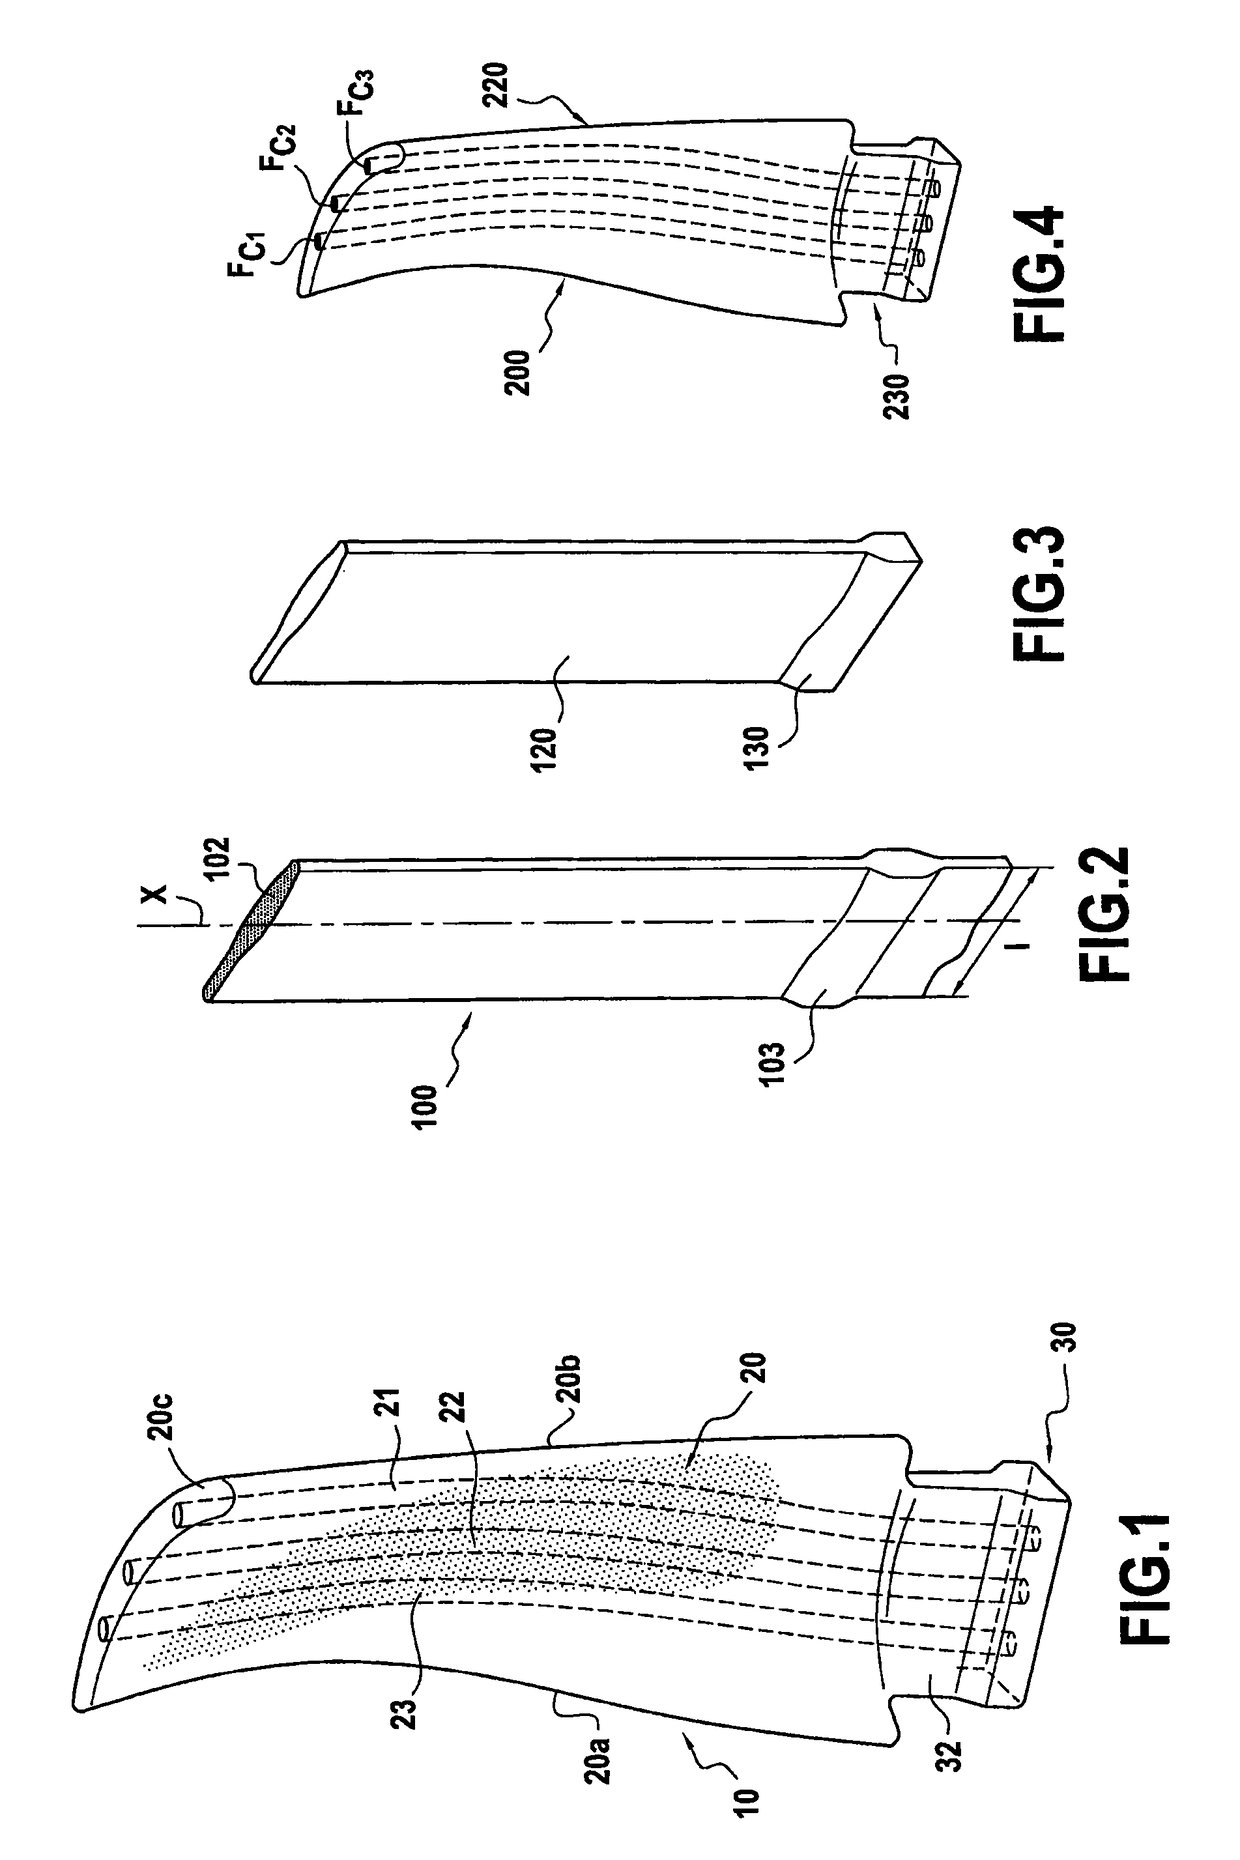 Method of fabricating a composite material blade having internal channels, and a composite material turbine engine blade